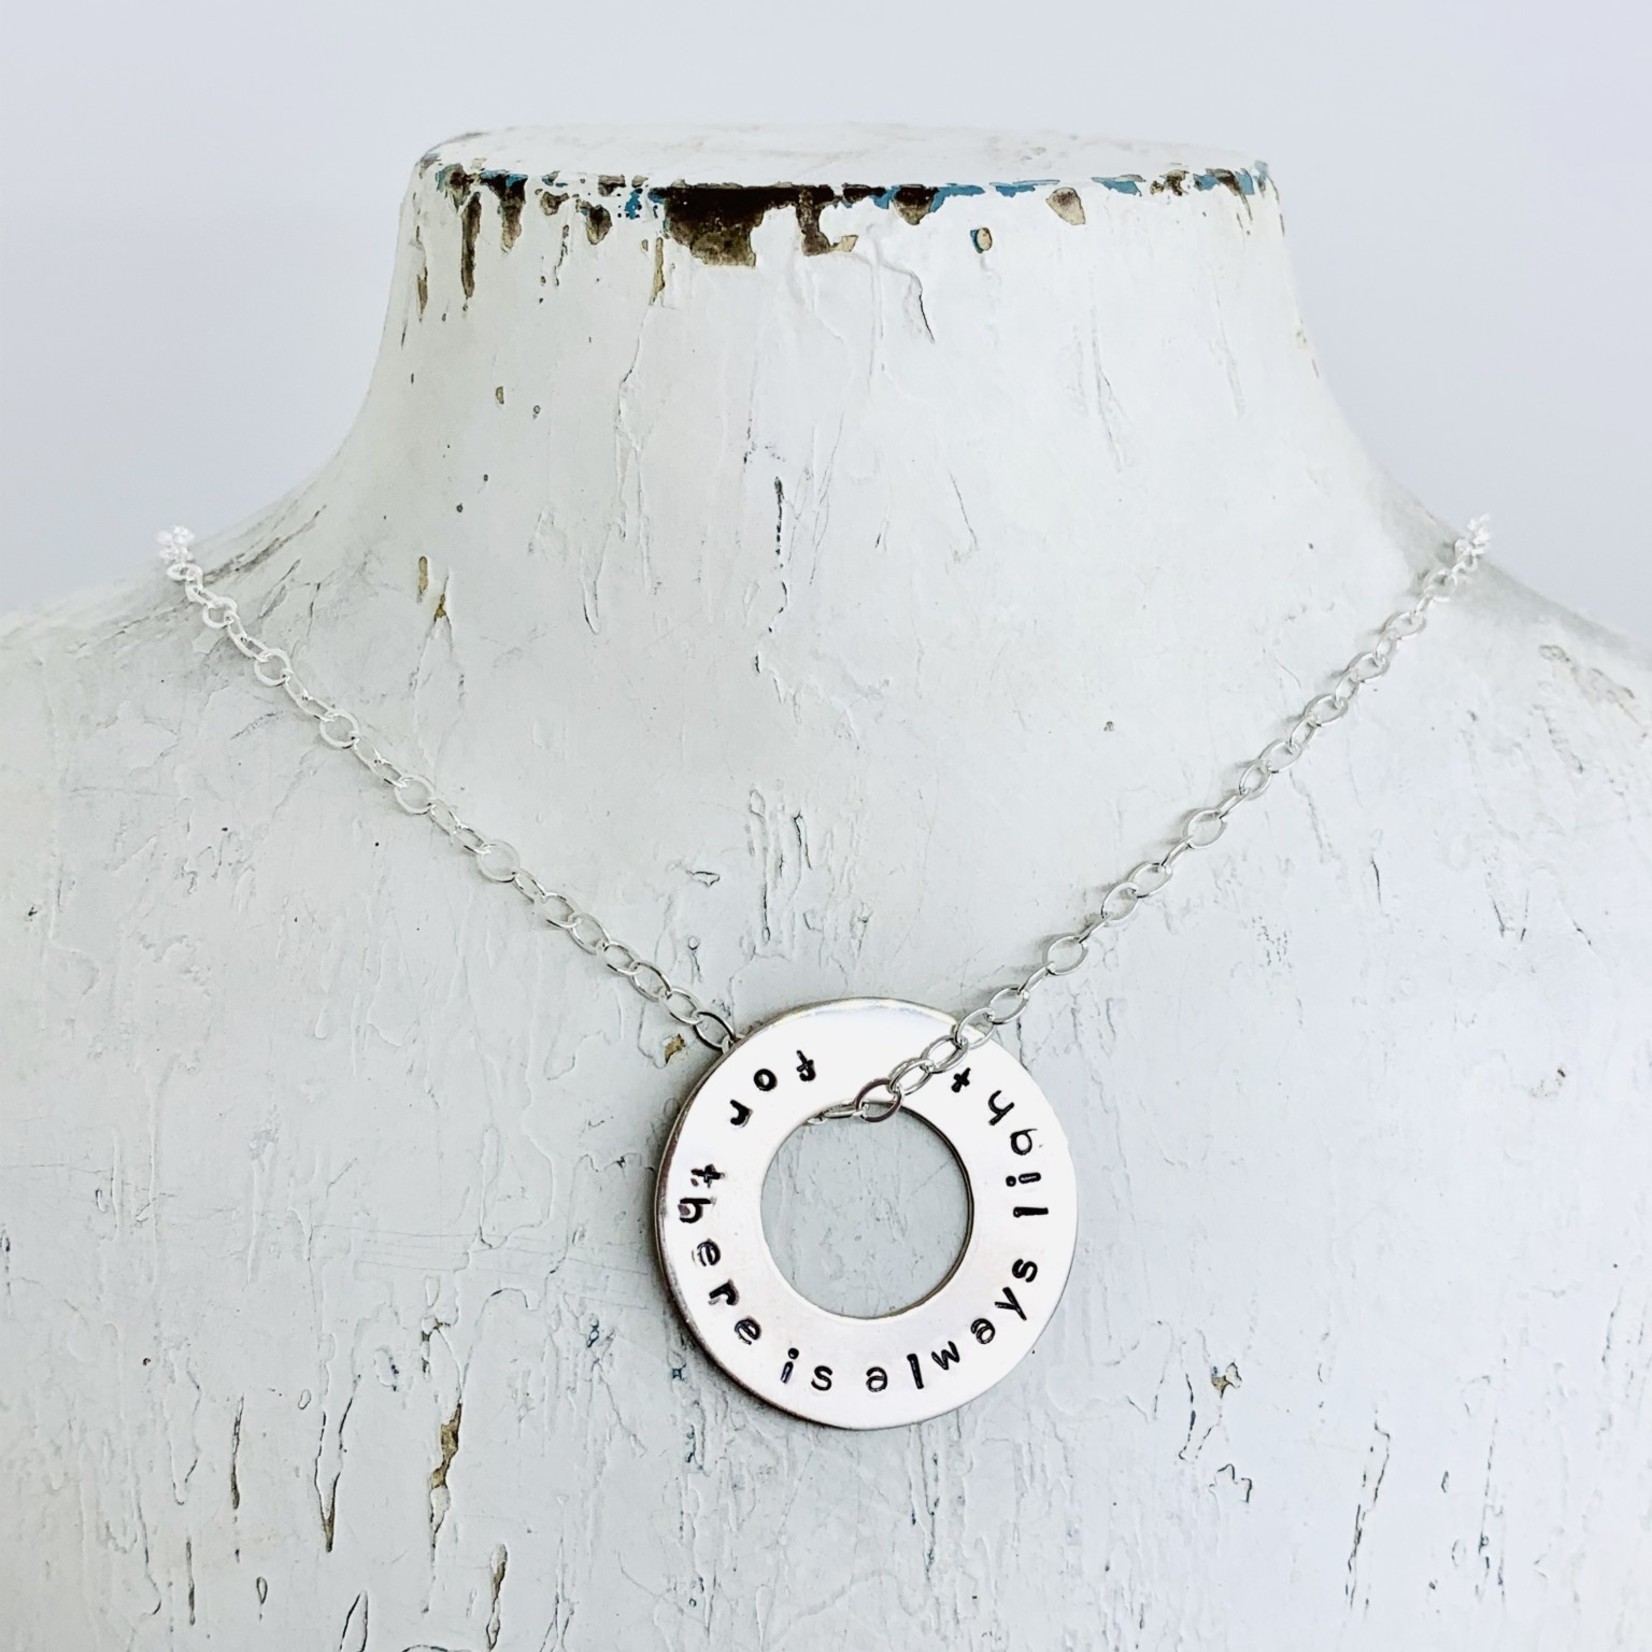 Handmade Necklace with washer "for there is always light" Amanda Gorman